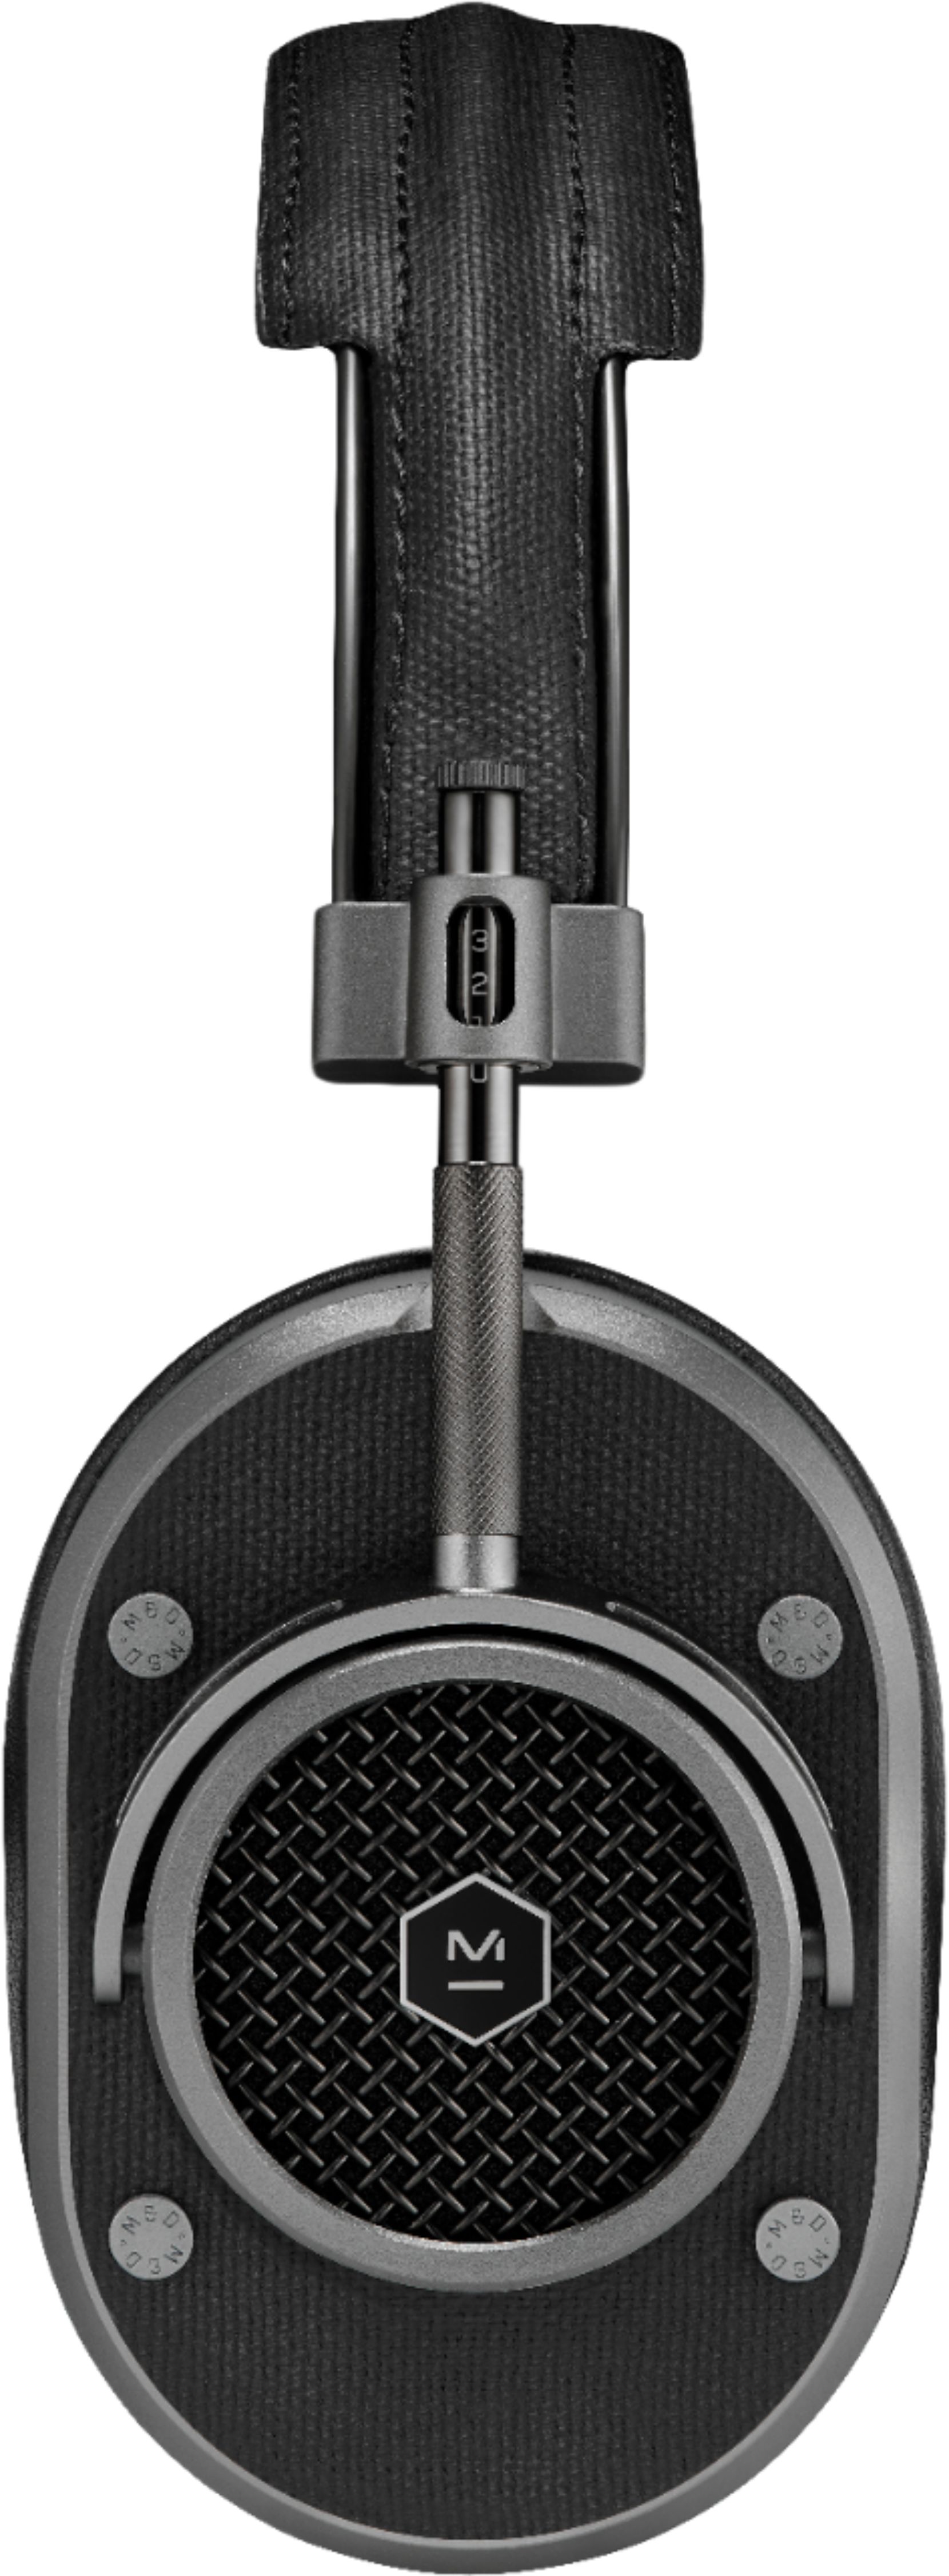 Angle View: Master & Dynamic - MH40 Wireless Over-the-Ear Headphones - Gunmetal/Black